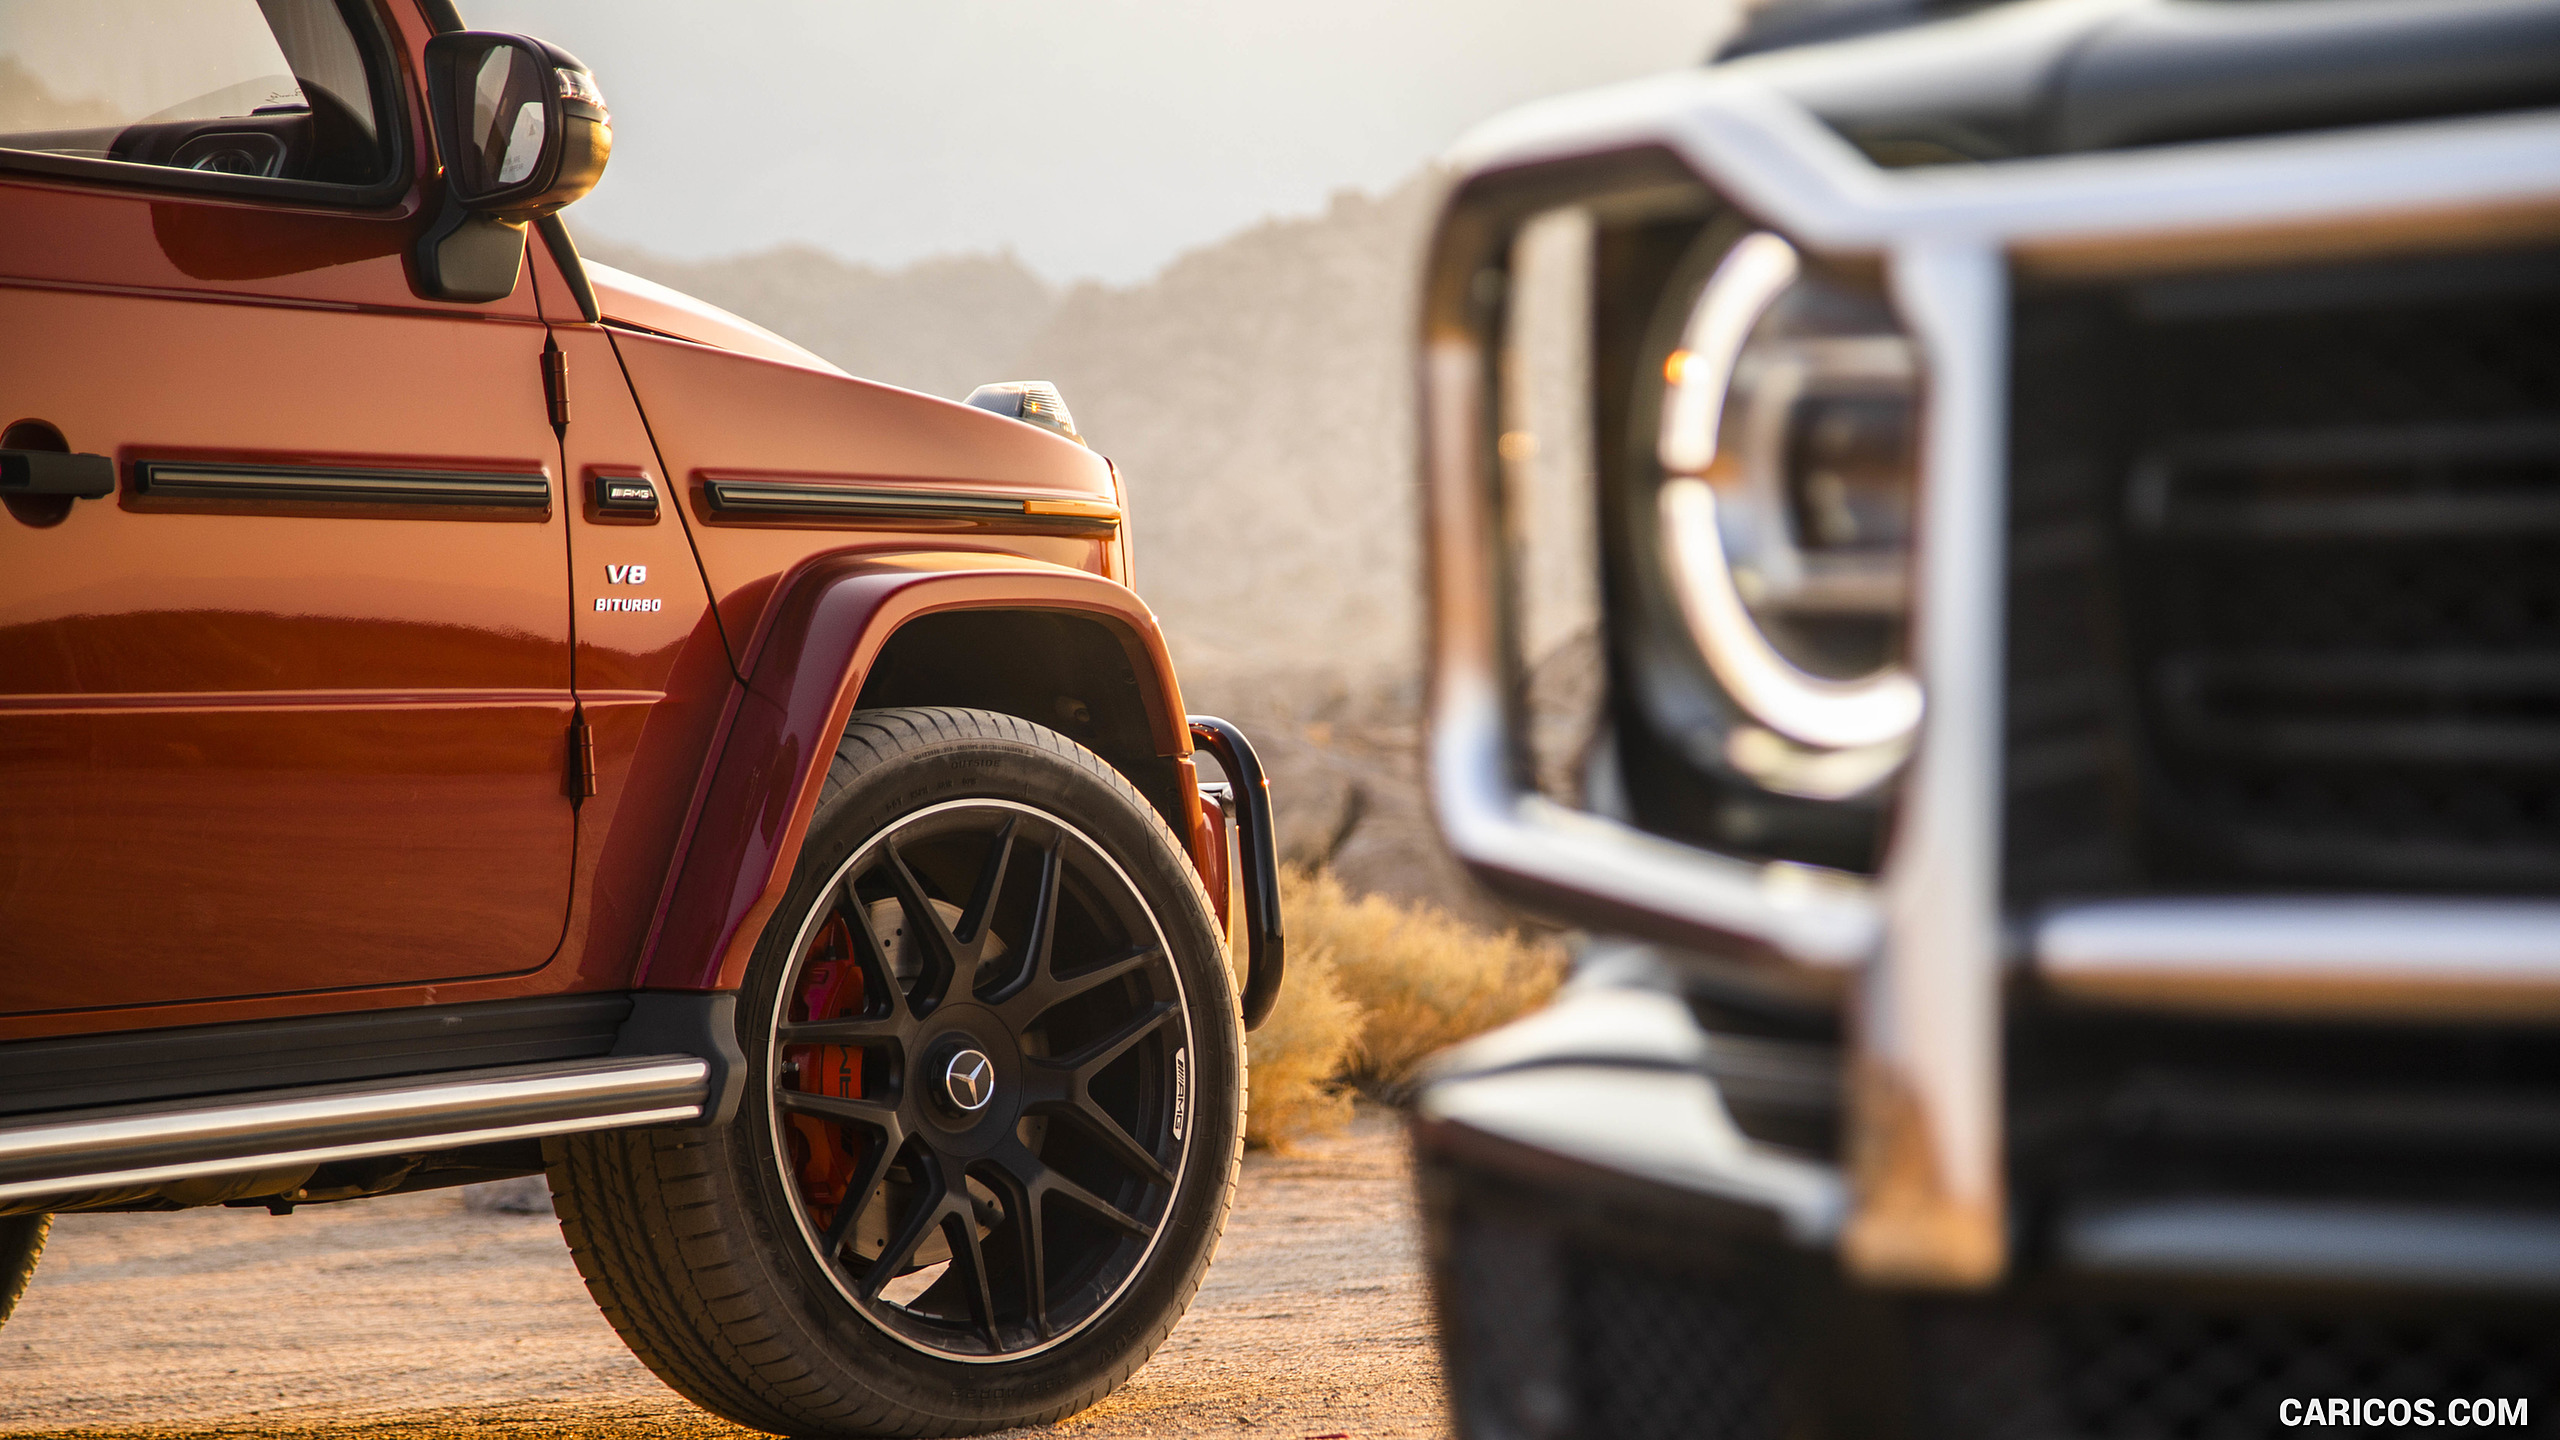 2019 Mercedes-AMG G63 (U.S.-Spec) and 2019 G550, #395 of 452